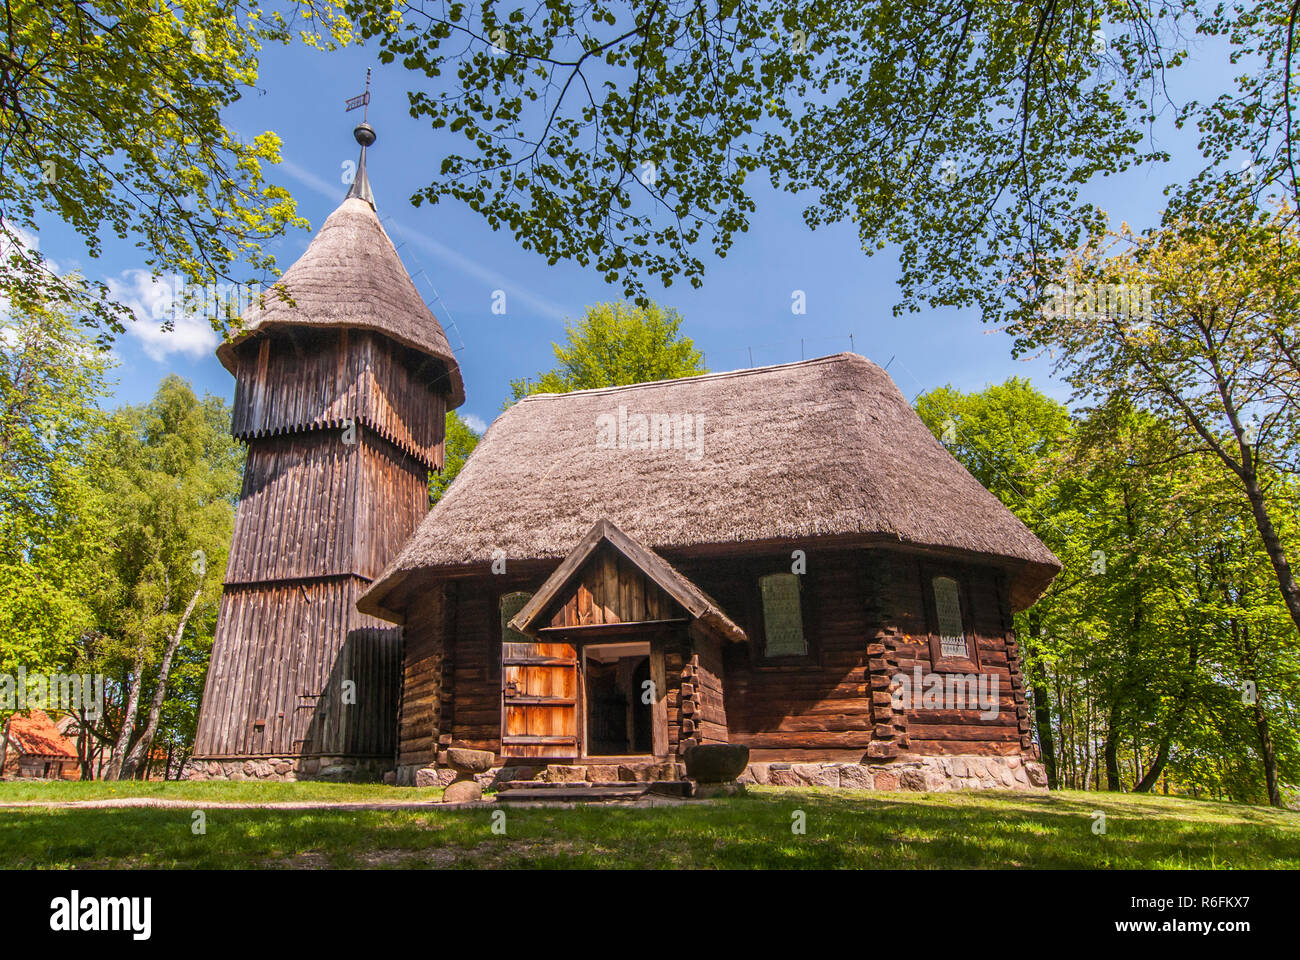 Old Wooden Evangelic Church With And Wooden Belfry, Both From Masuria Region, Ethnographic Park In Olsztynek, Poland Stock Photo